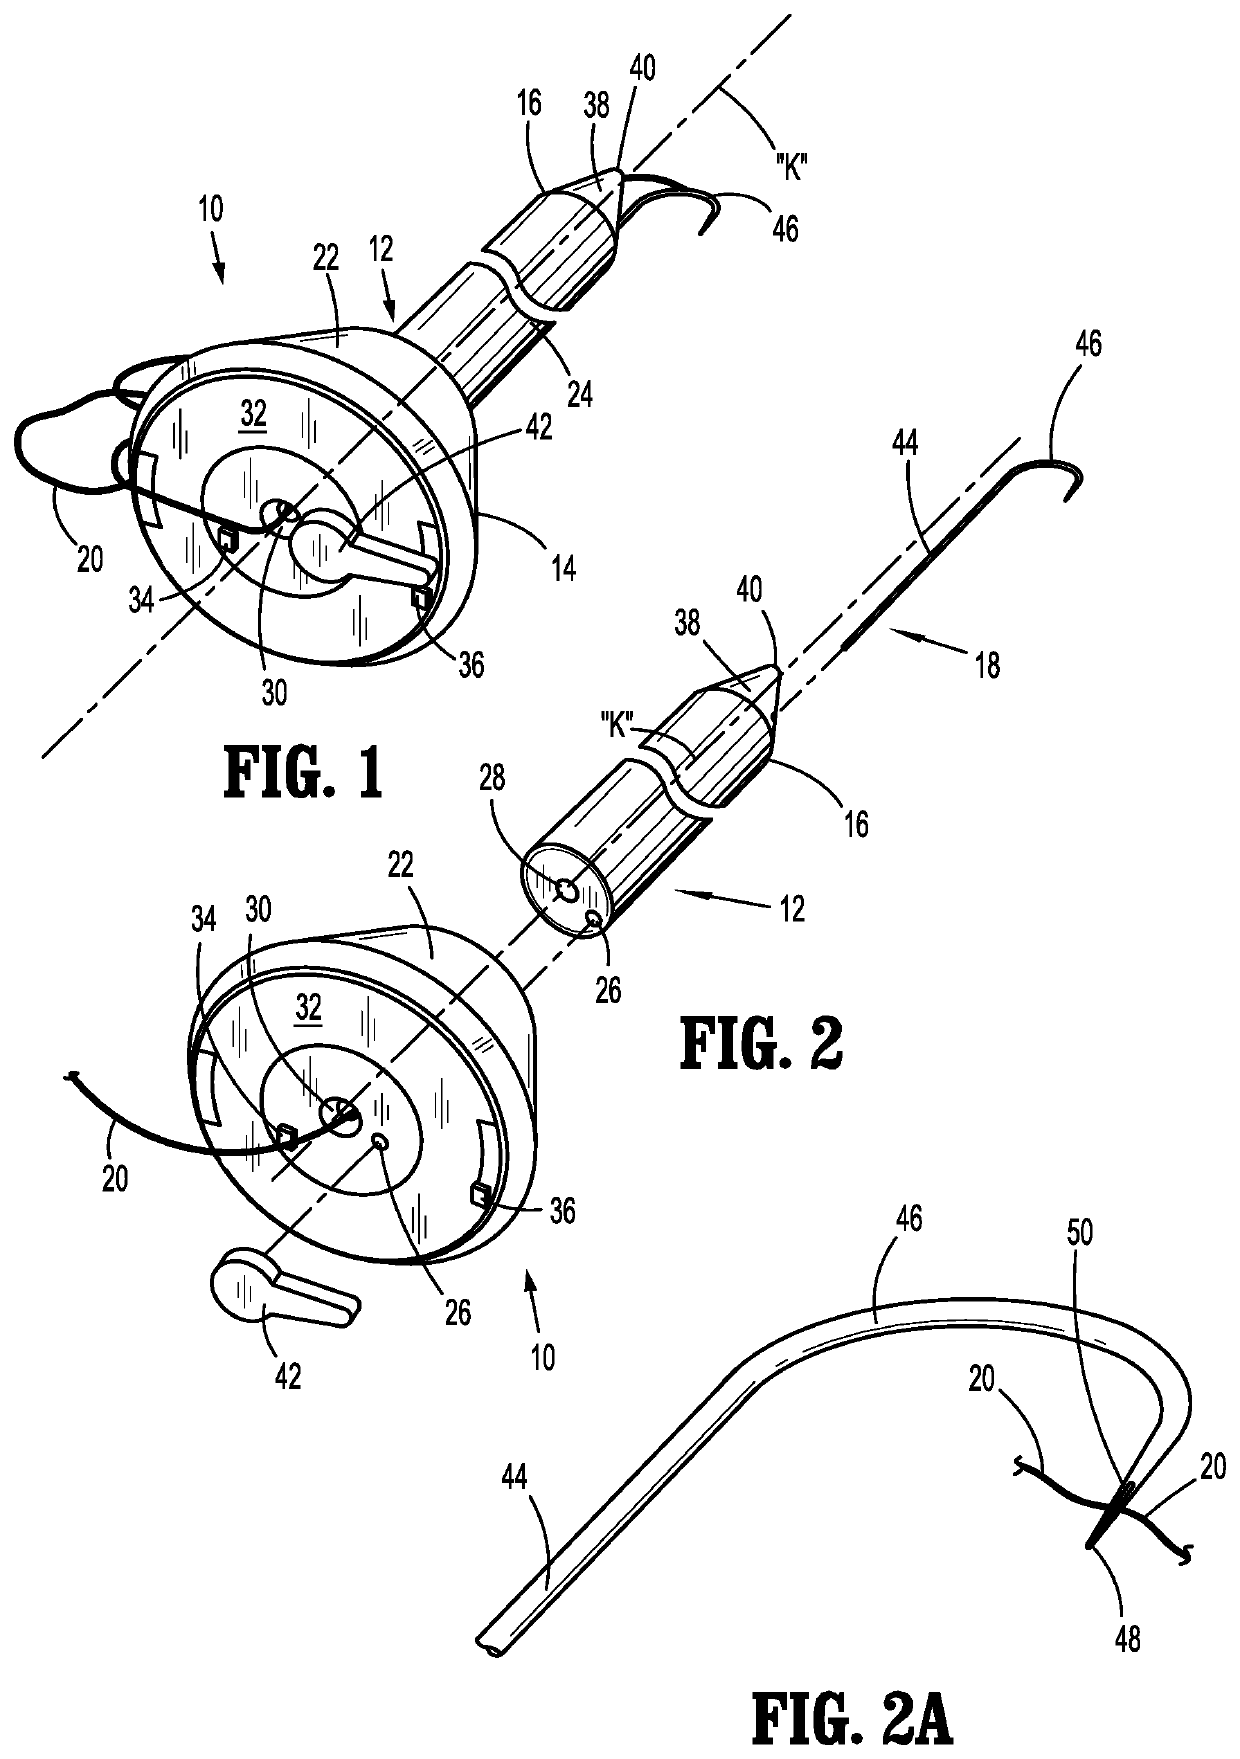 Surgical wound closure apparatus